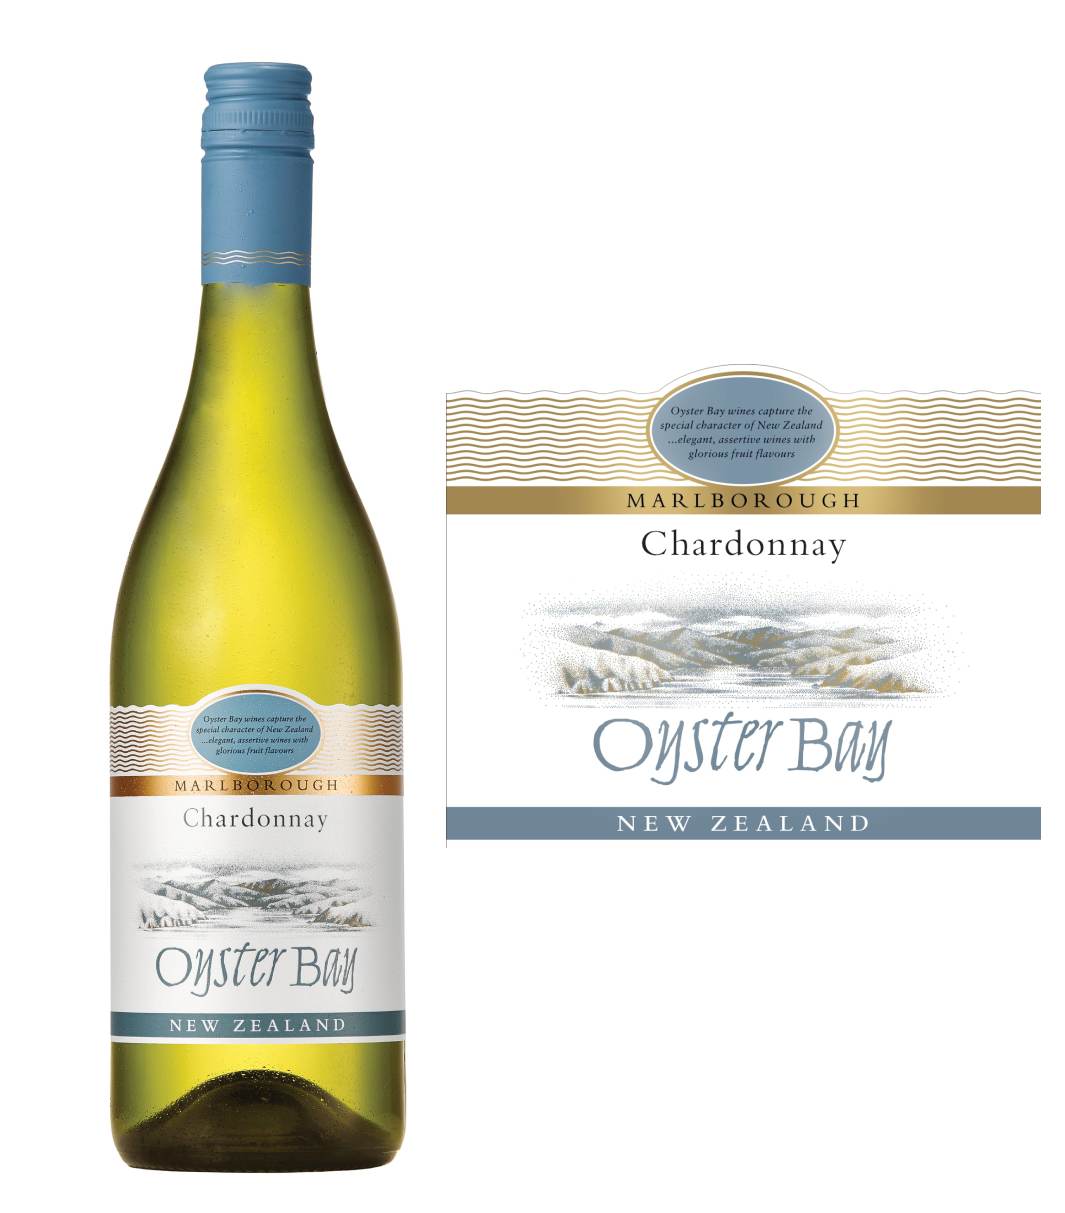 Save on Oyster Bay New Zealand Sauvignon Blanc Wine Order Online Delivery